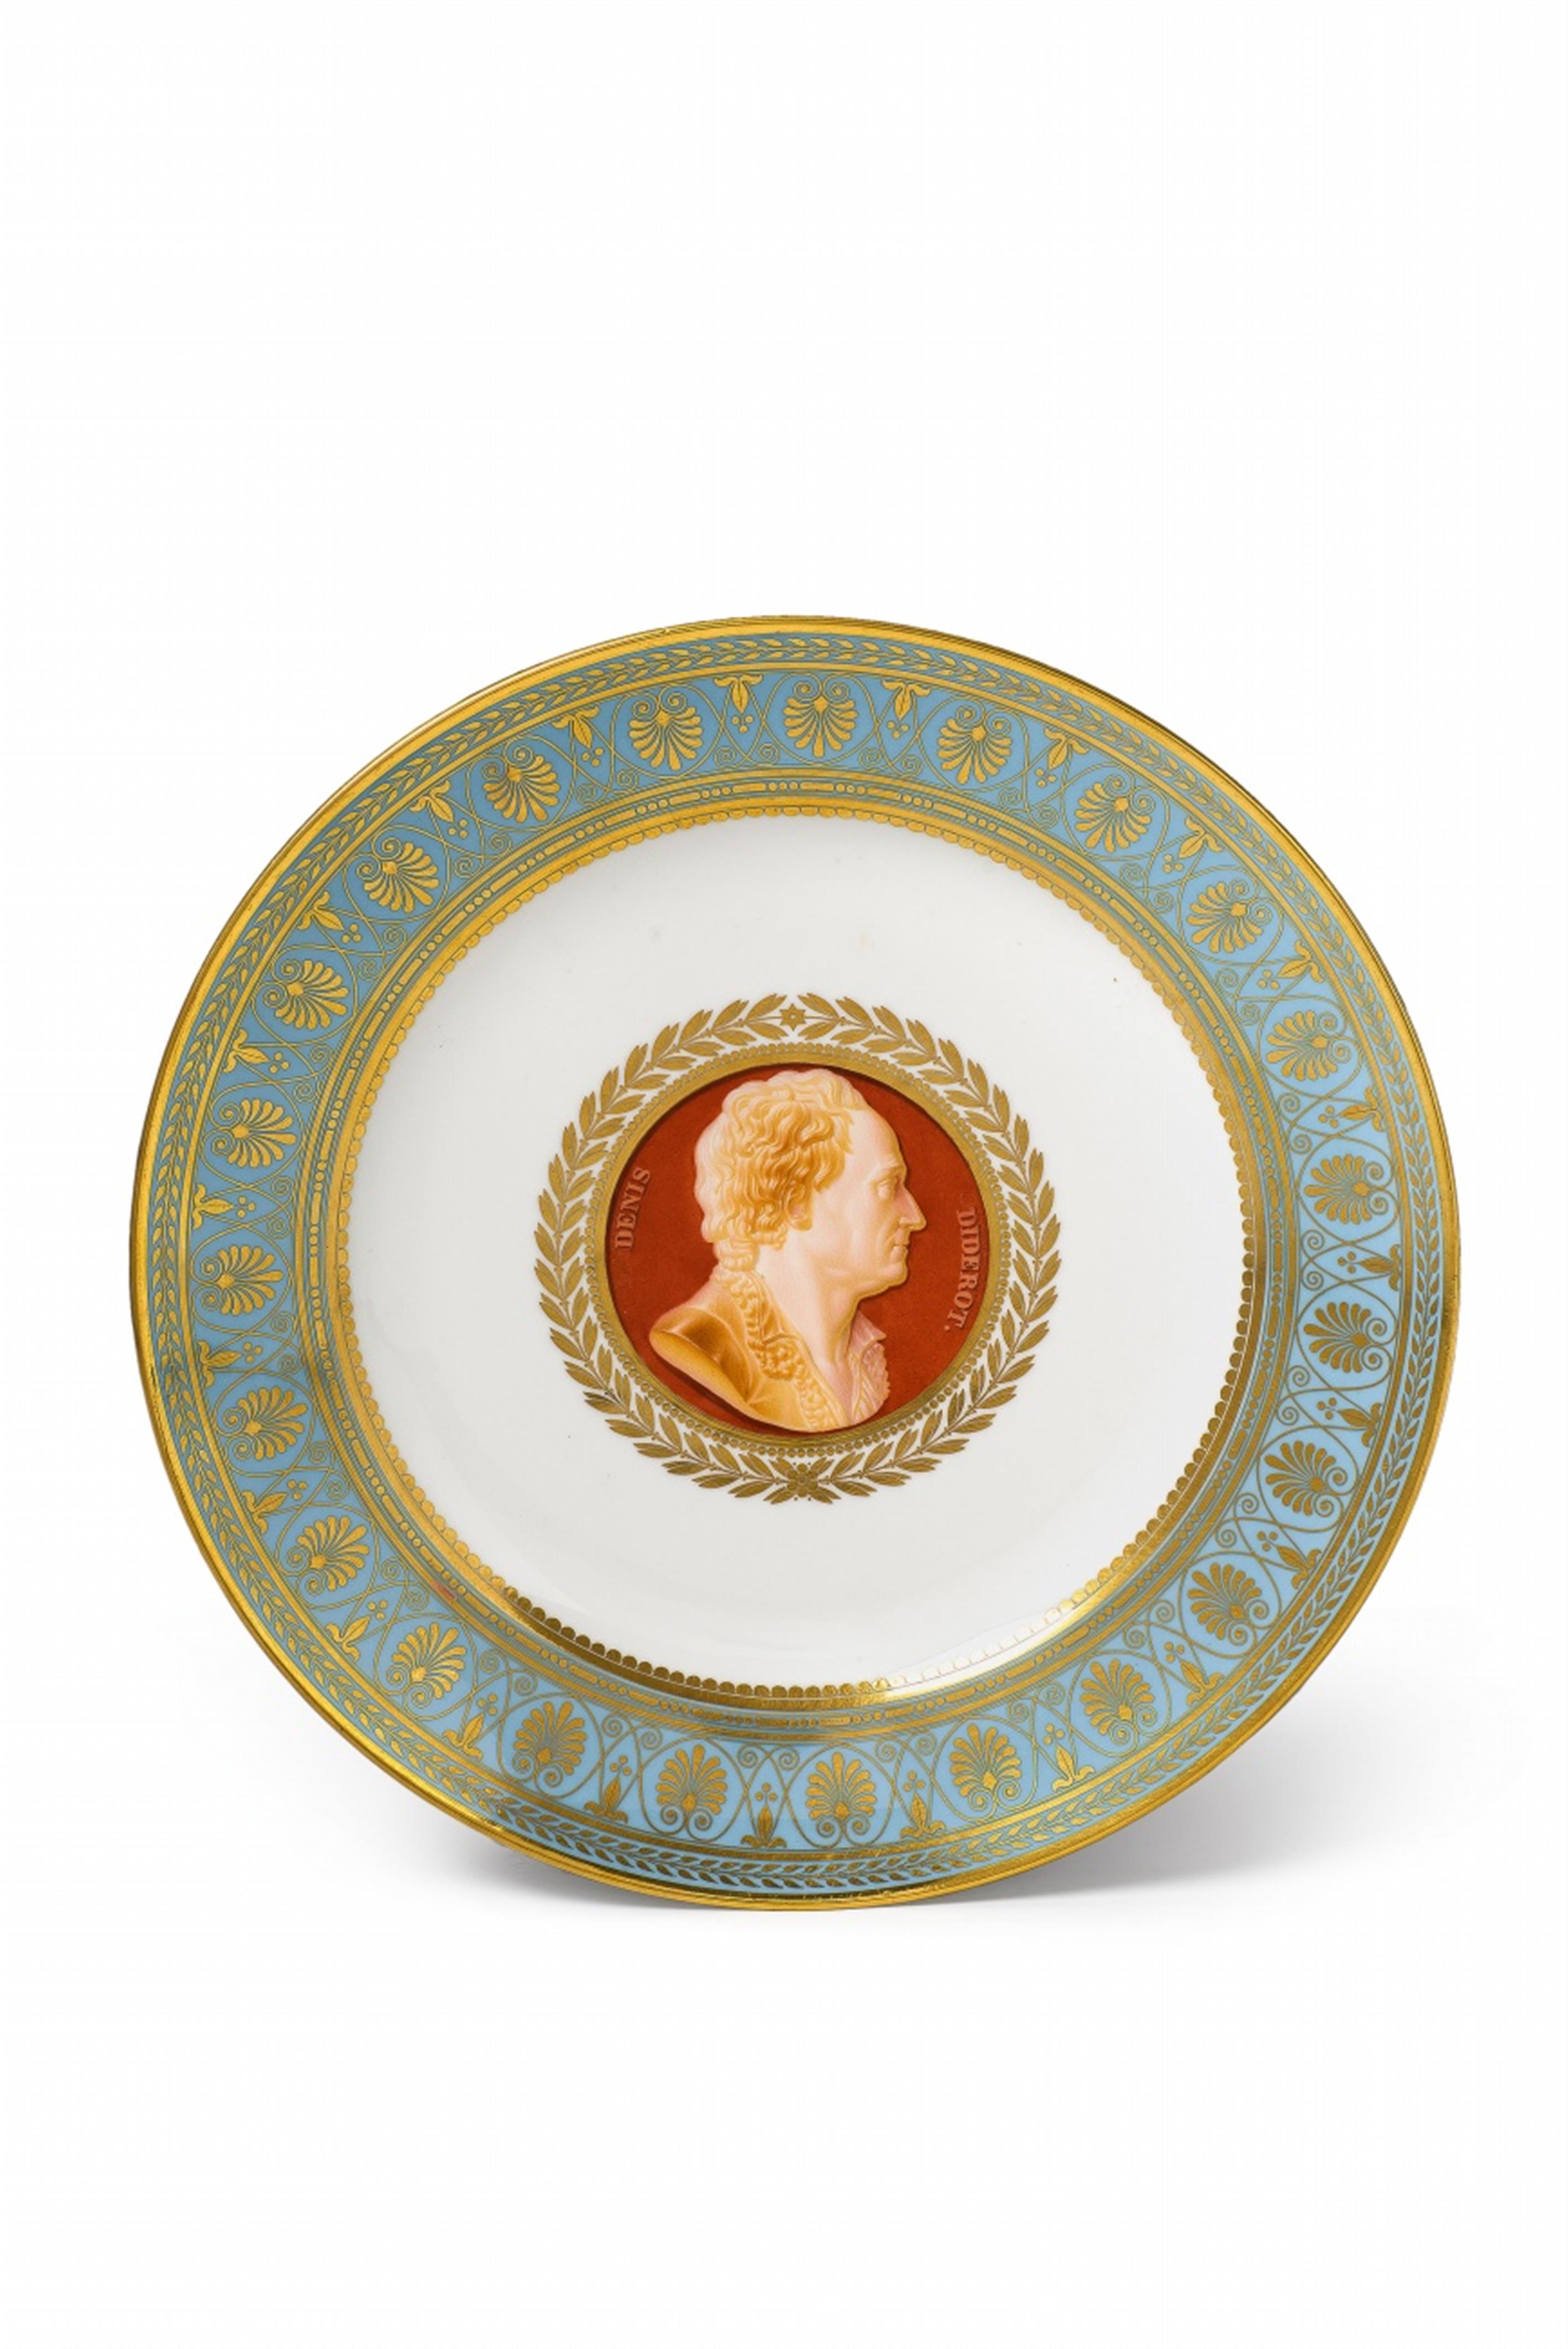 A Sèvres porcelain plate with a cameo portrait of Denis Diderot - image-1